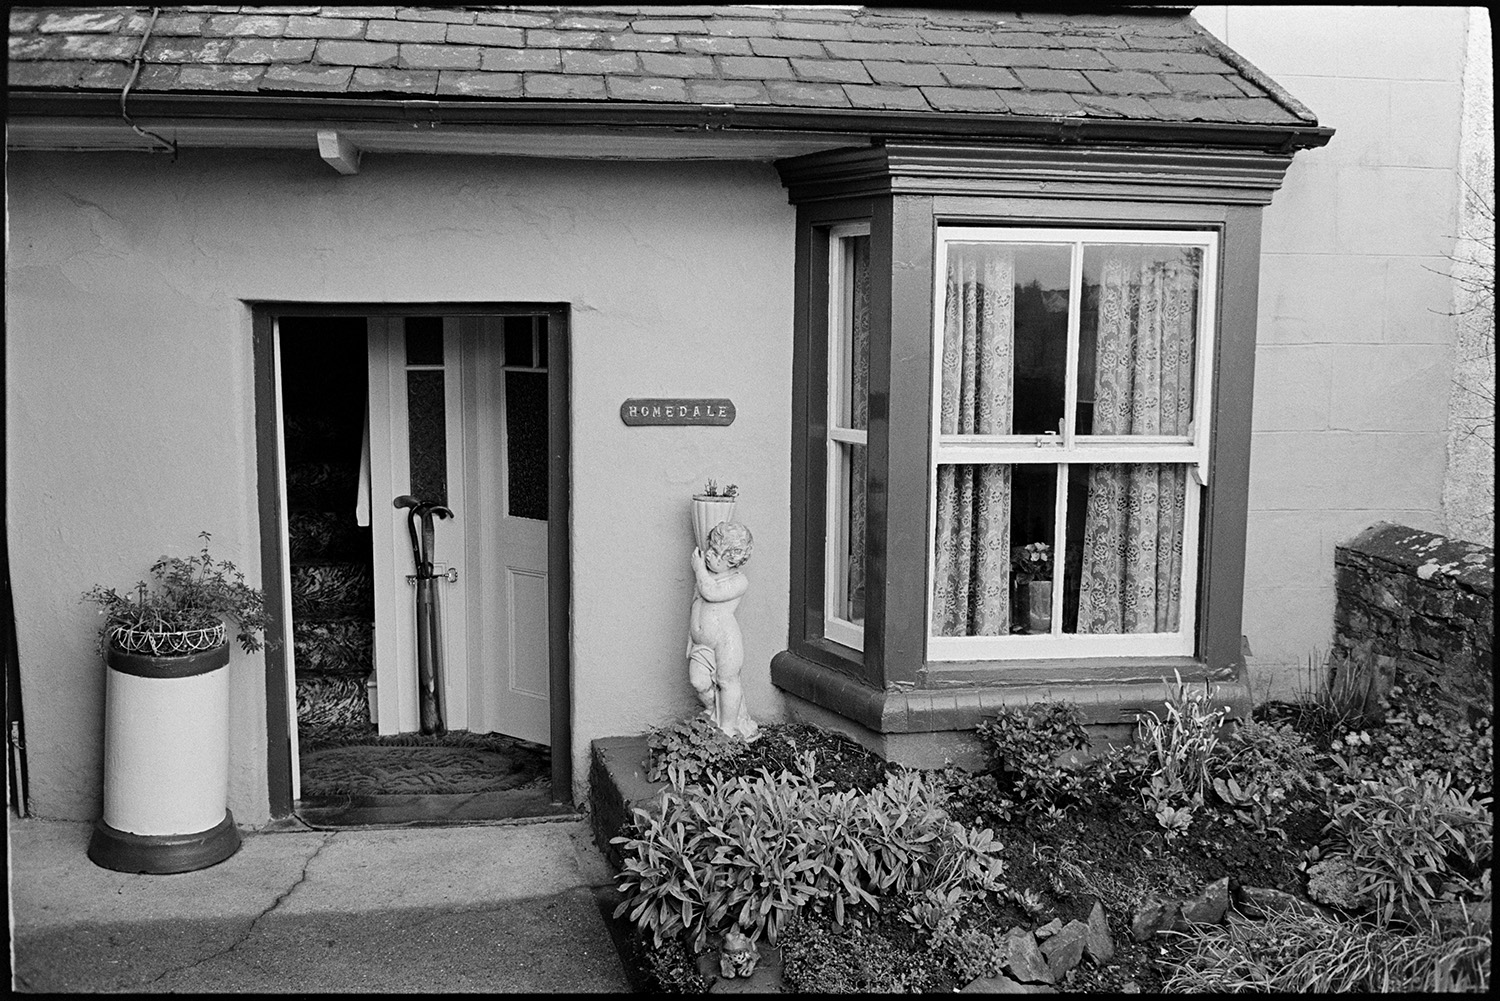 Milkman on last round chatting to customers, settling bills. Front of Post Office. 
[The front entrance to a house in Beaford called 'Homedale'. A plant containers and statue are by the front door and walking sticks can be seen just inside the entrance.]